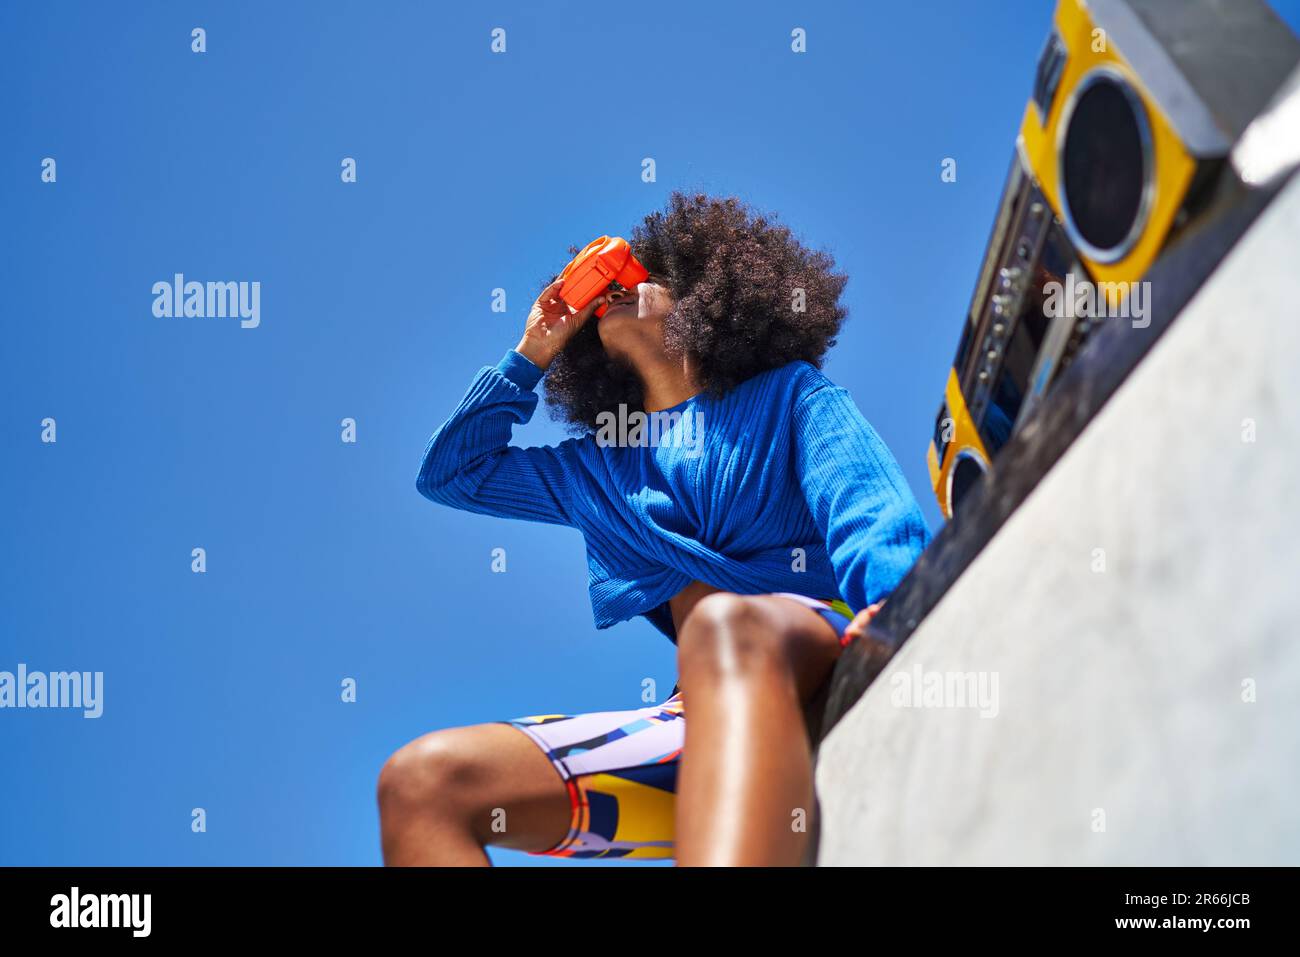 Young woman with boom box and view finder against blue sky Stock Photo